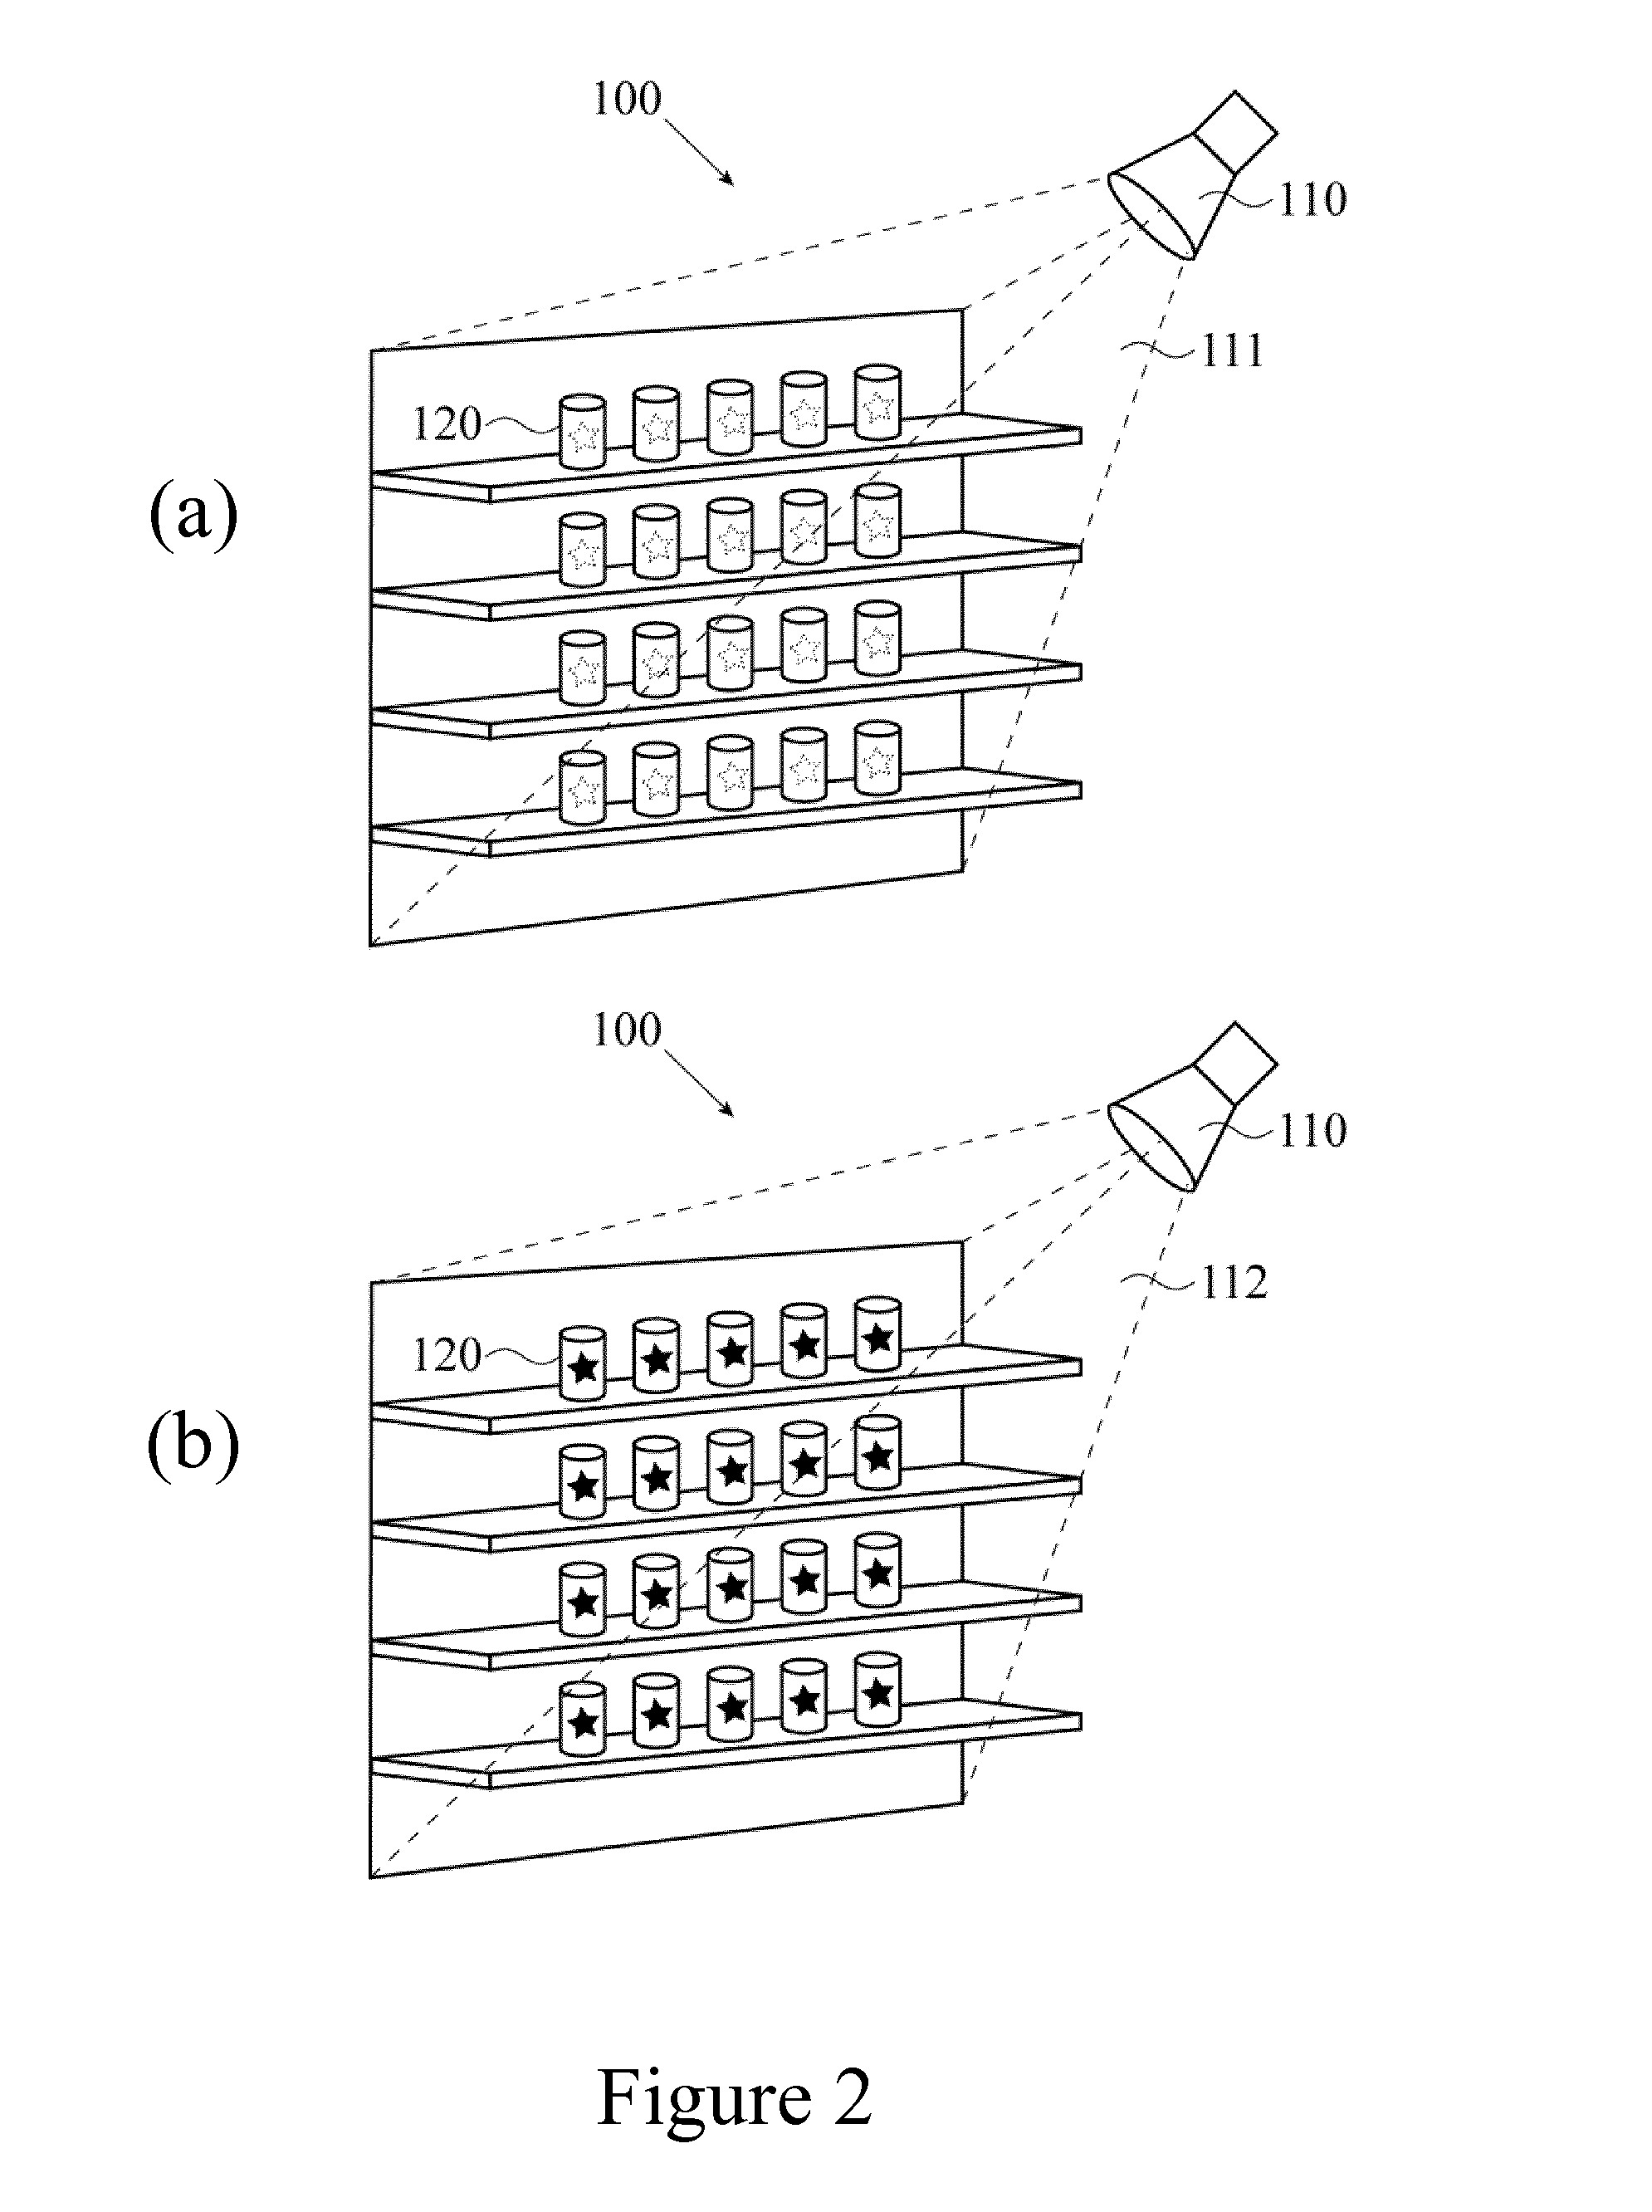 Arrangement for changing the visual appearance of a target object